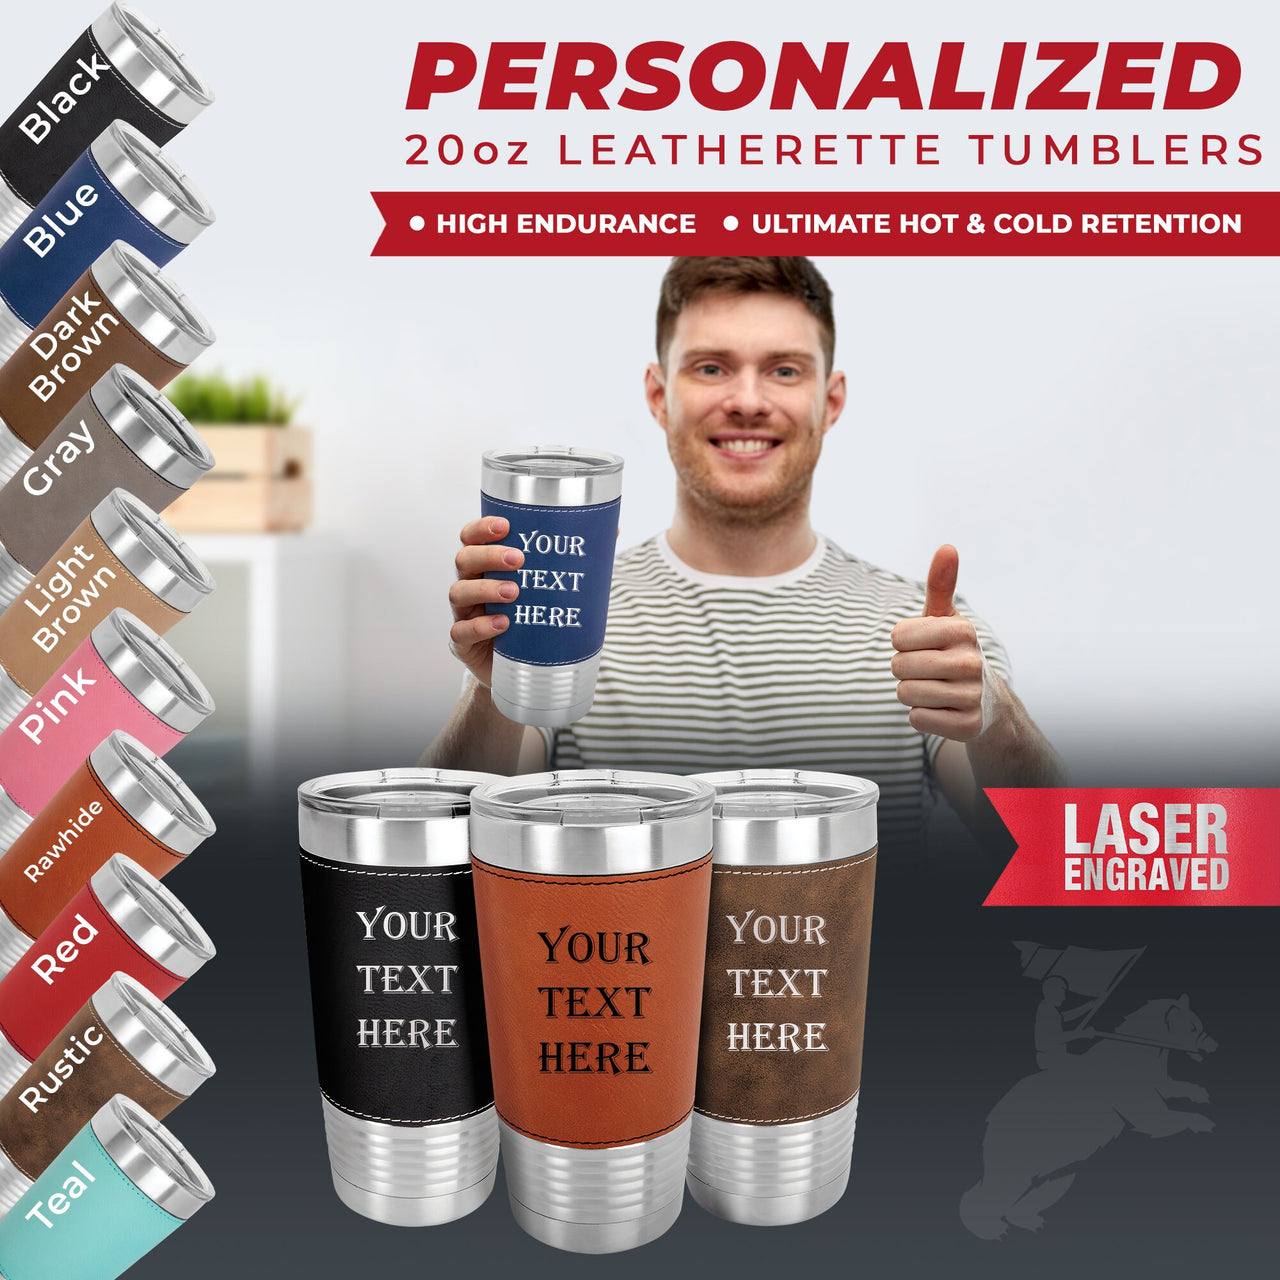 Premium Quality Personalized Your Text Tumbler, Custom Insulated Tumbler, Custom Text, Bridesmaid Proposal, Bridesmaid Gift, Christmas gift